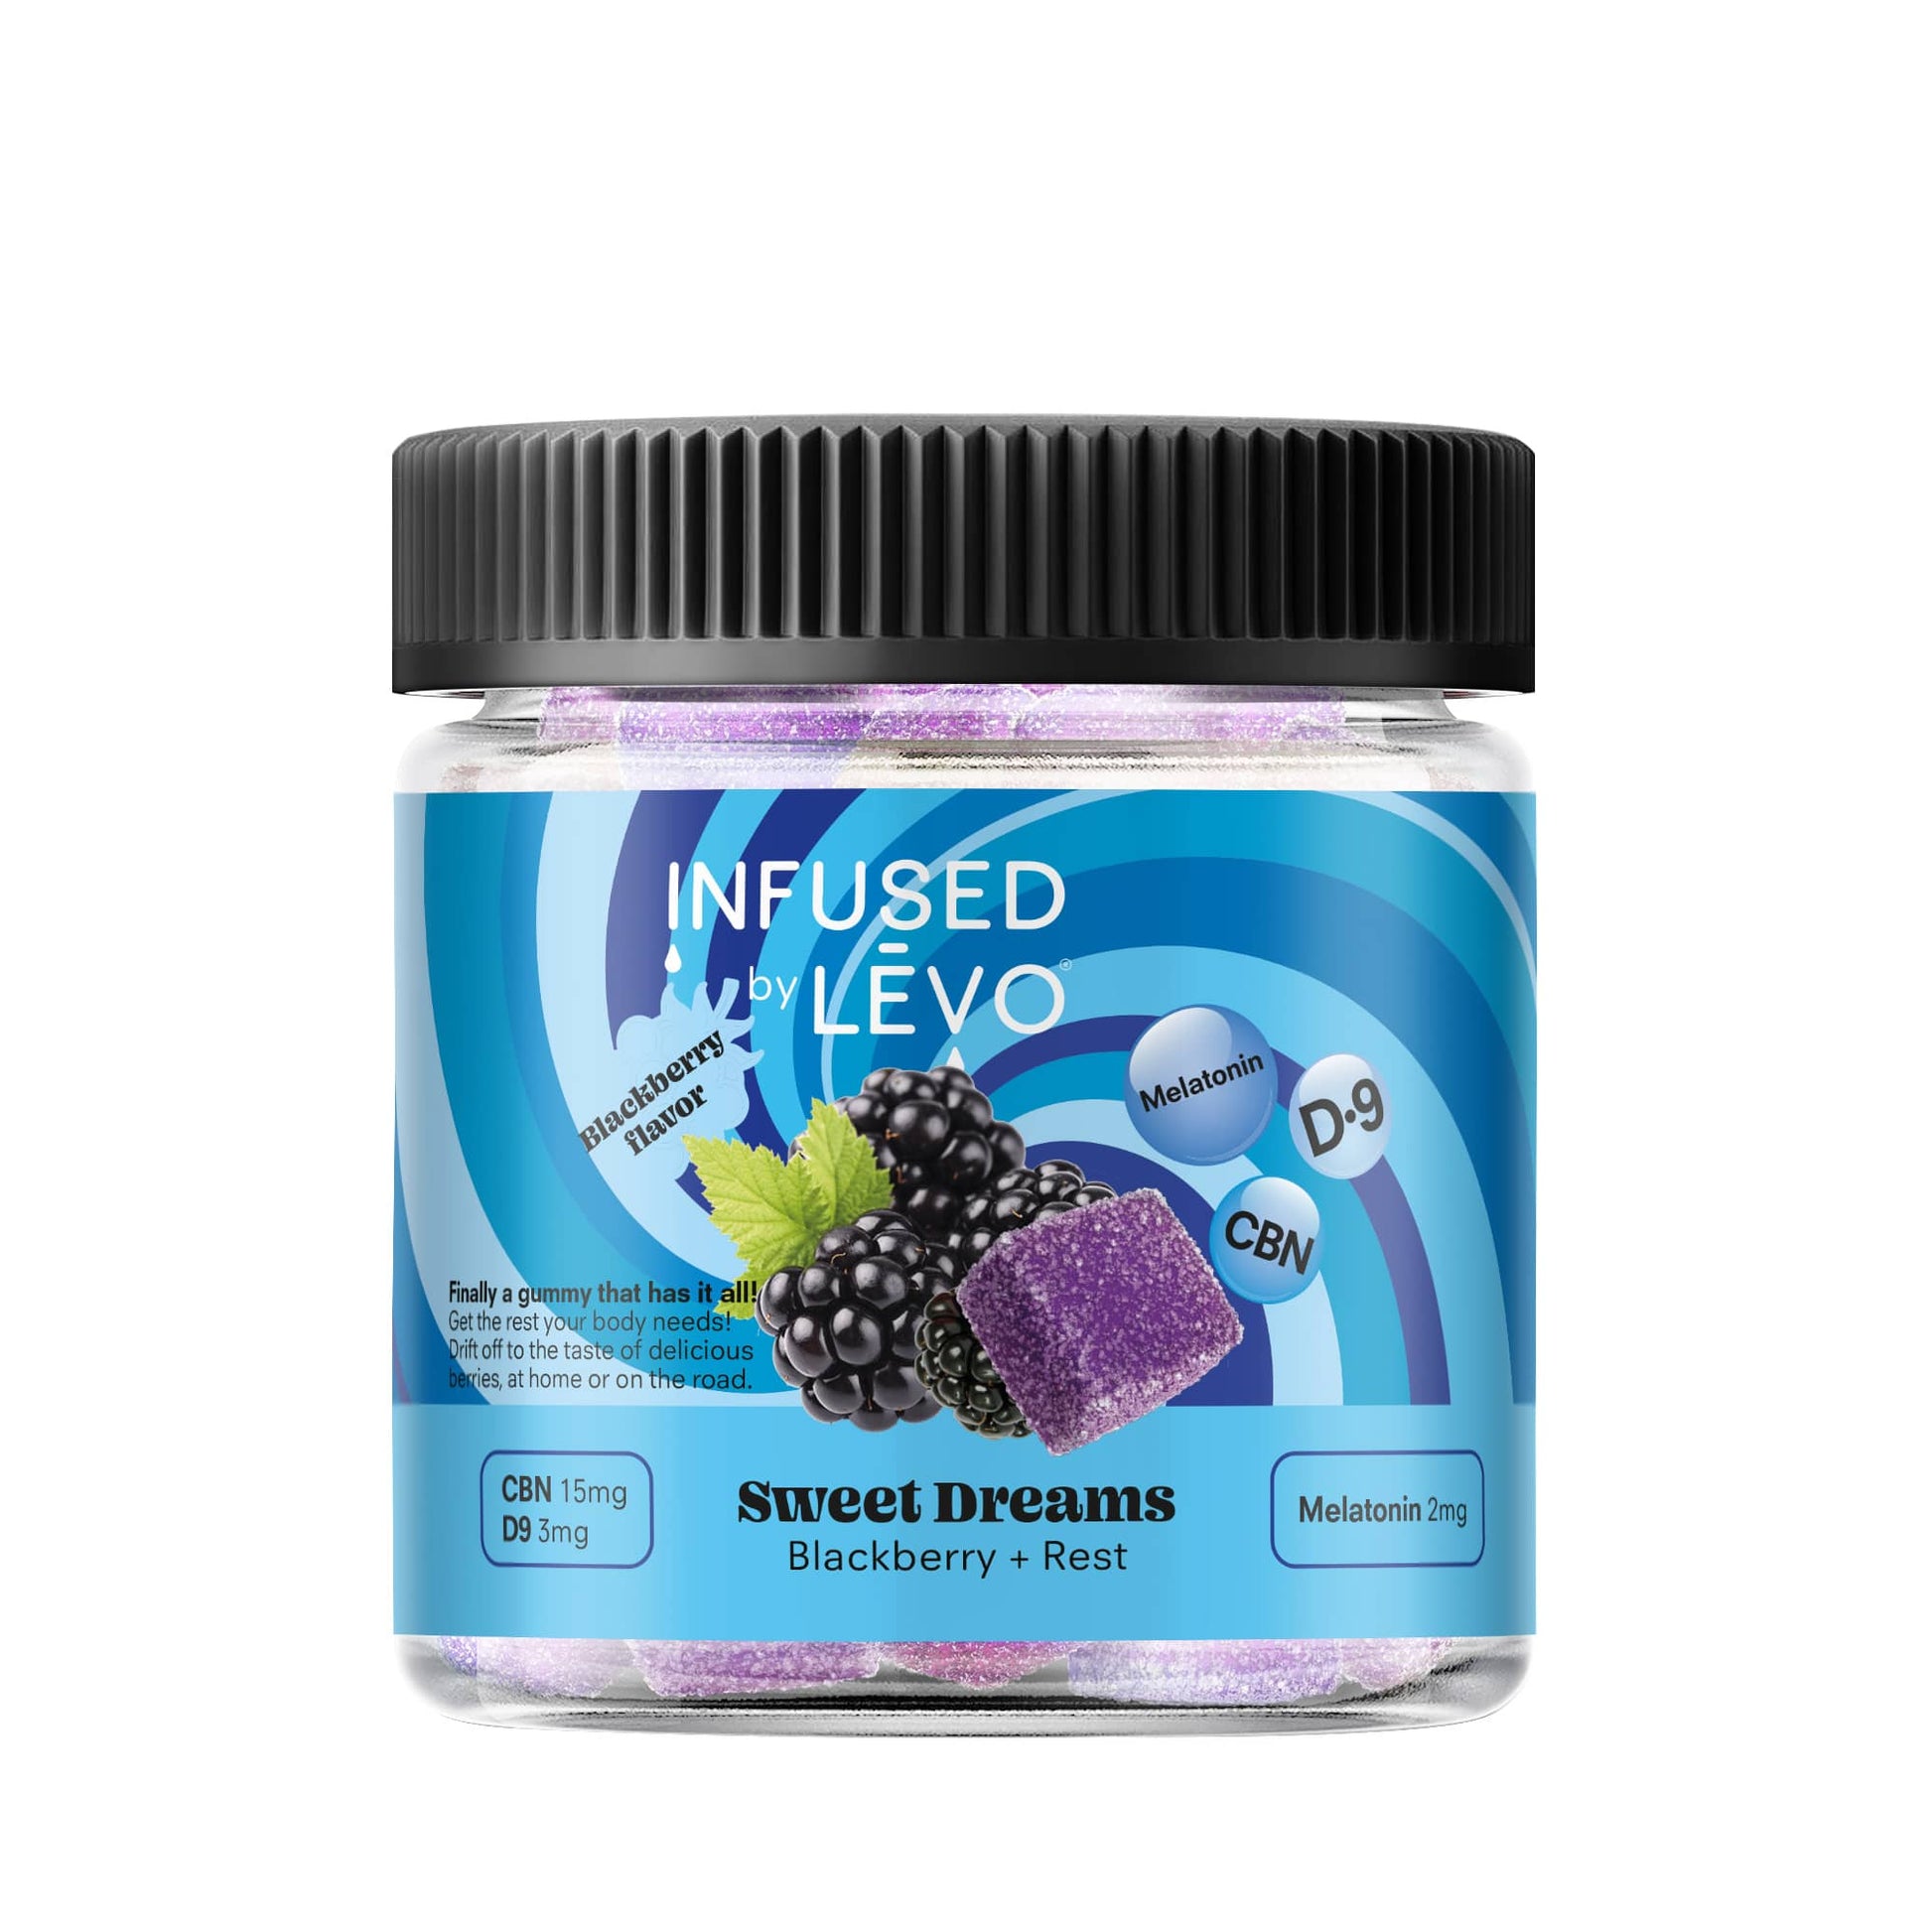 Infused by LEVO Sweet Dreams Gummies blackberry flavored for rest. Closed bottle.